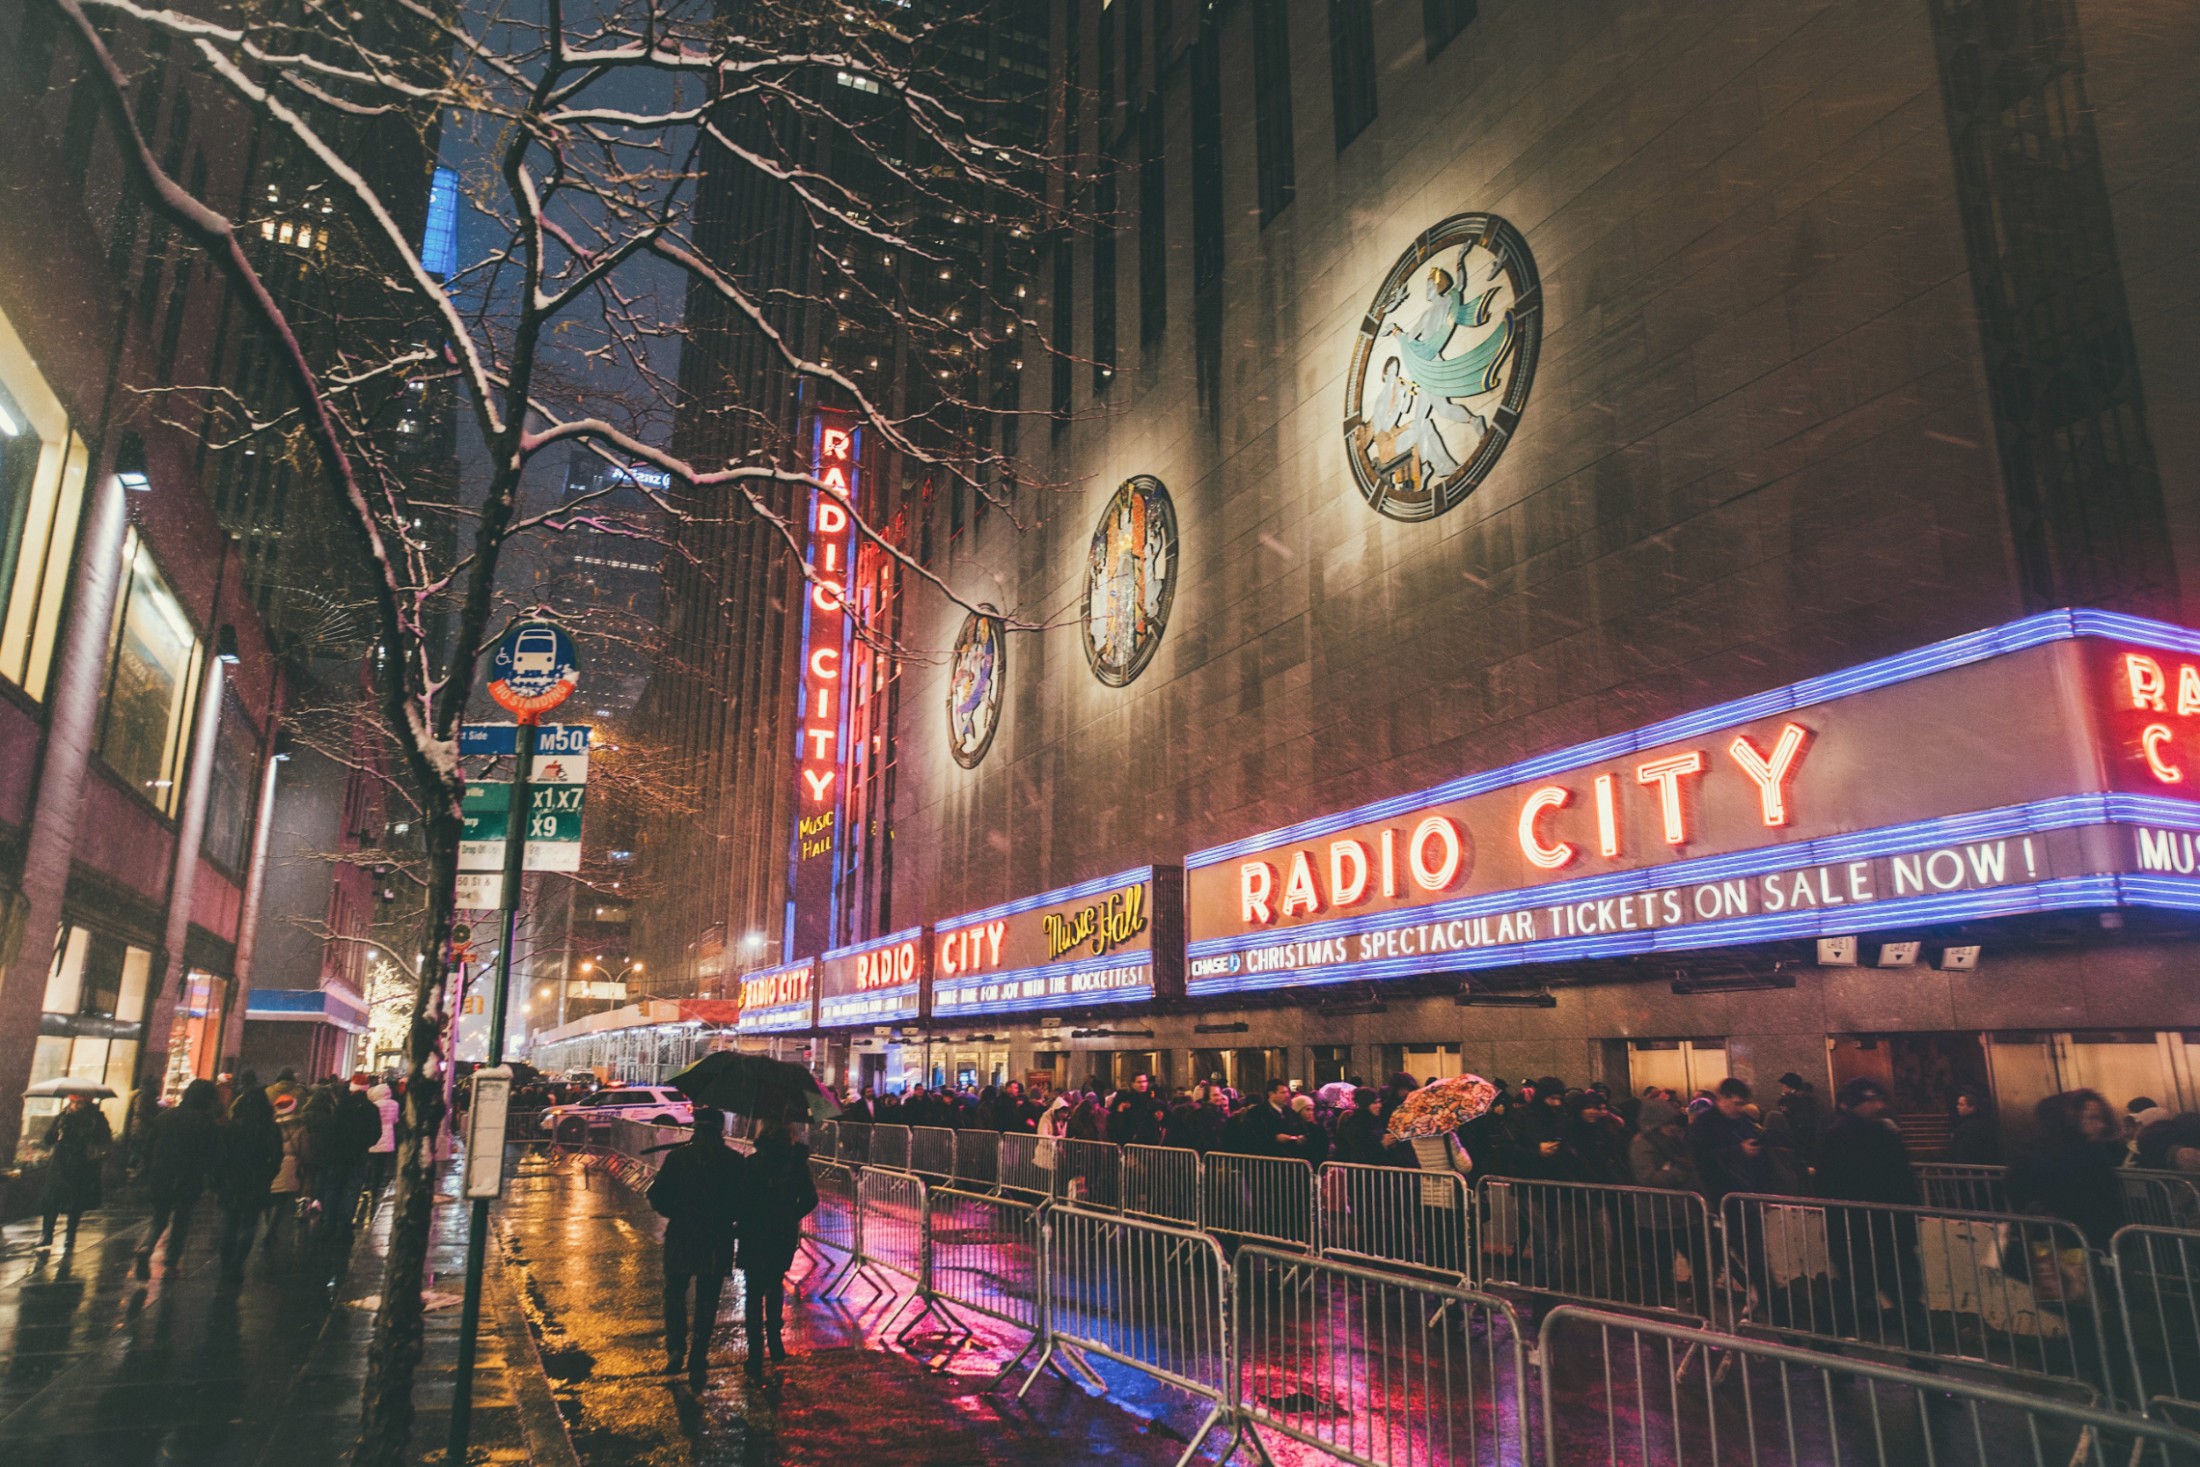 The Marquee outside of Radio City Music Hall